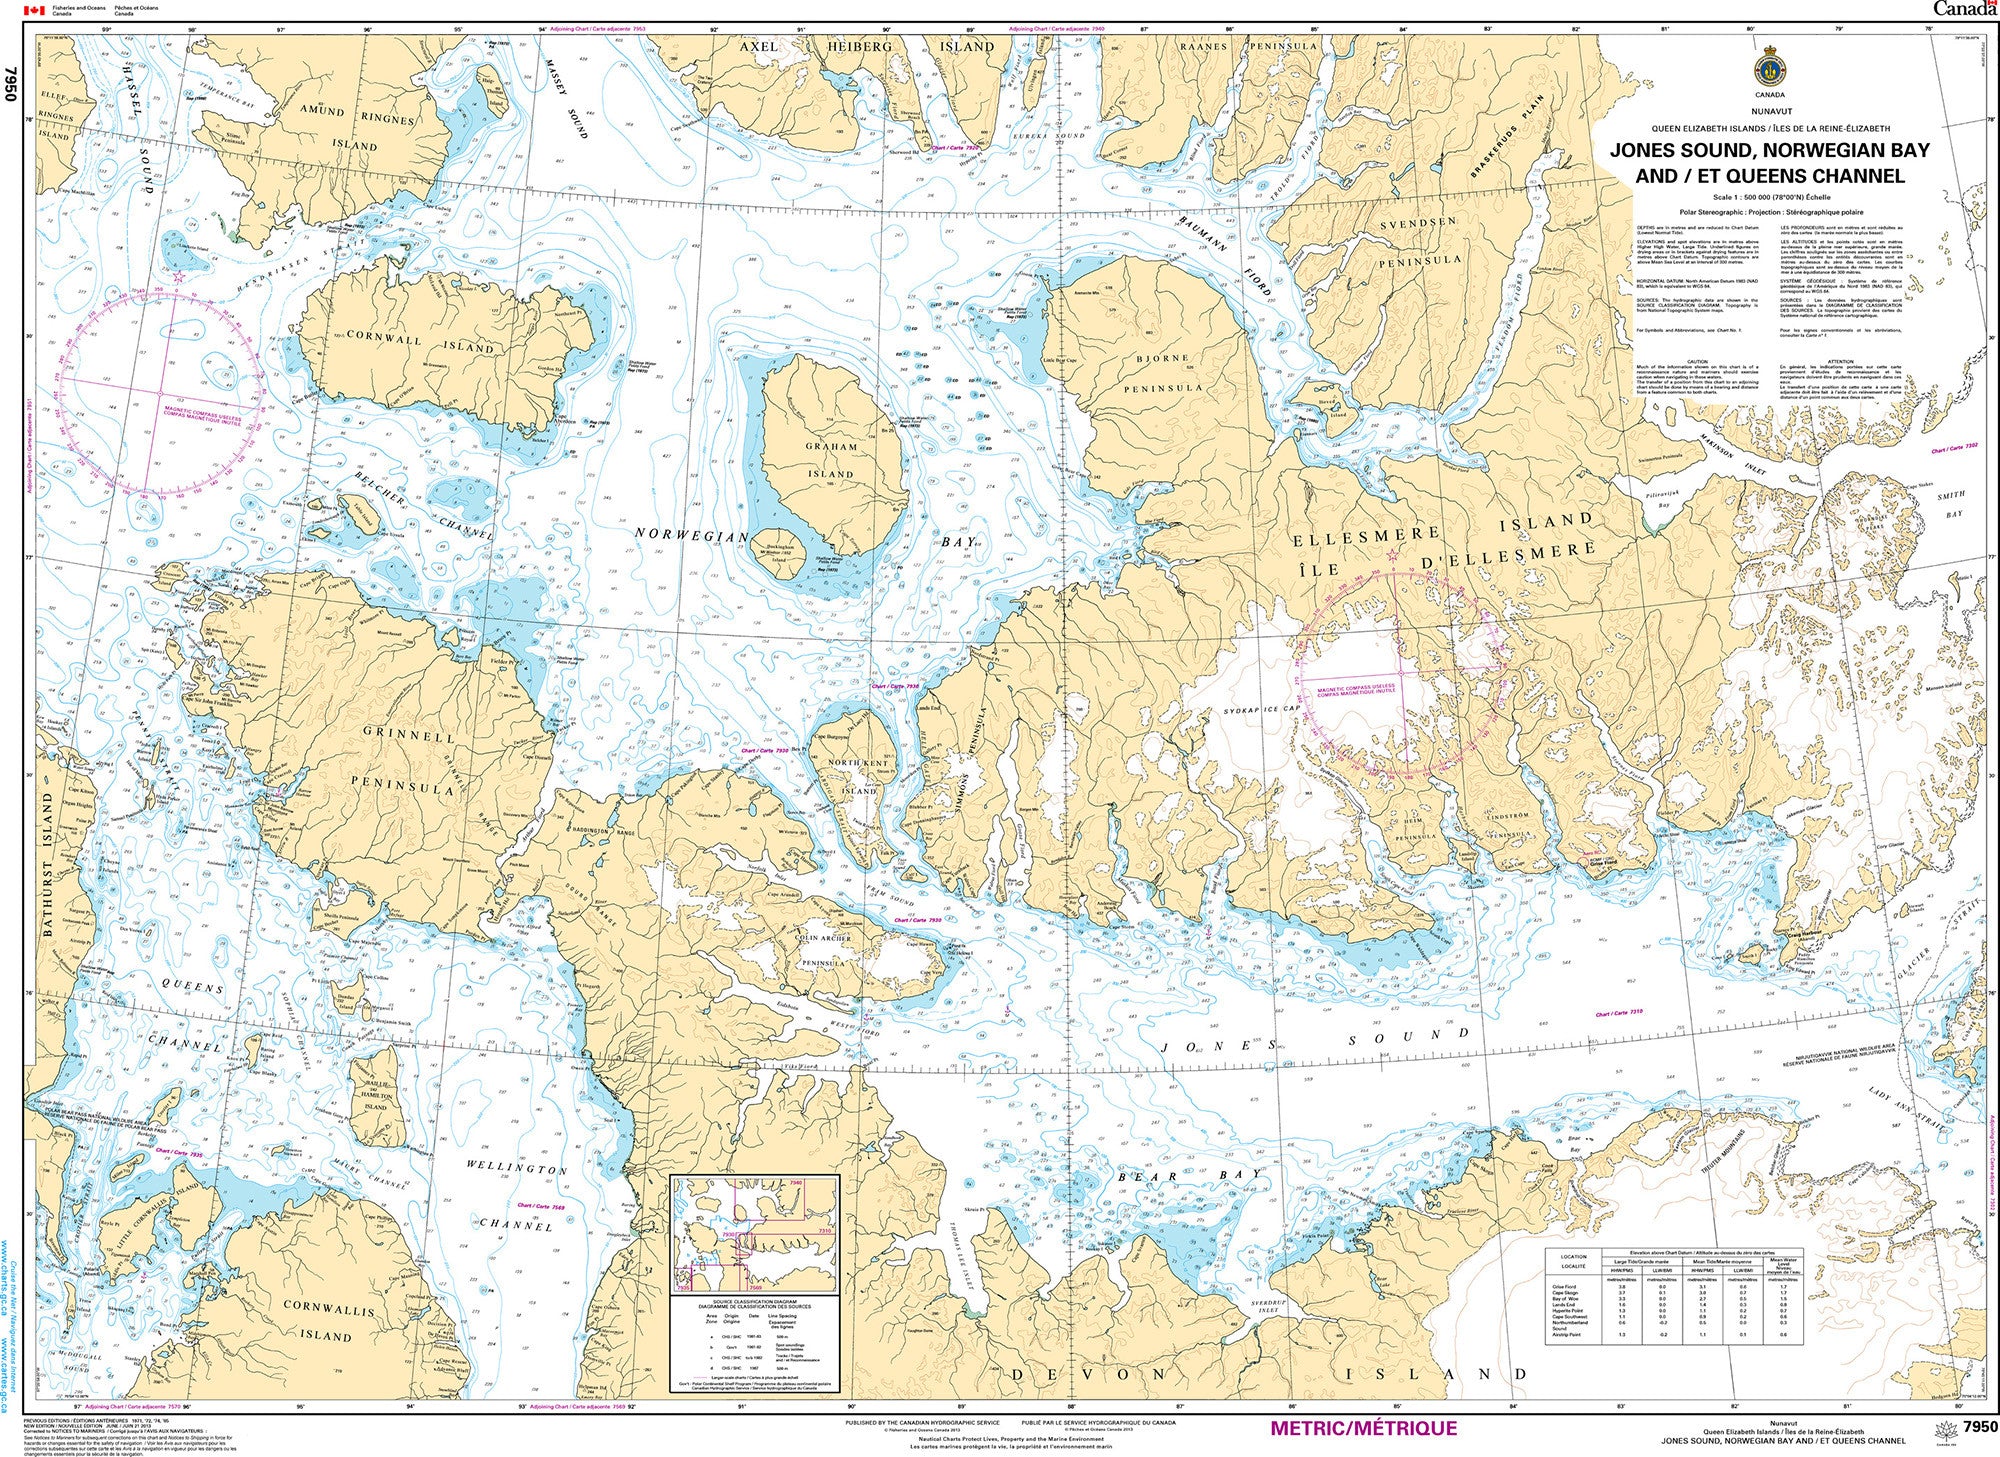 Canadian Hydrographic Service Nautical Chart CHS7950: Jones Sound,Norwegion Bay and Queens Channel